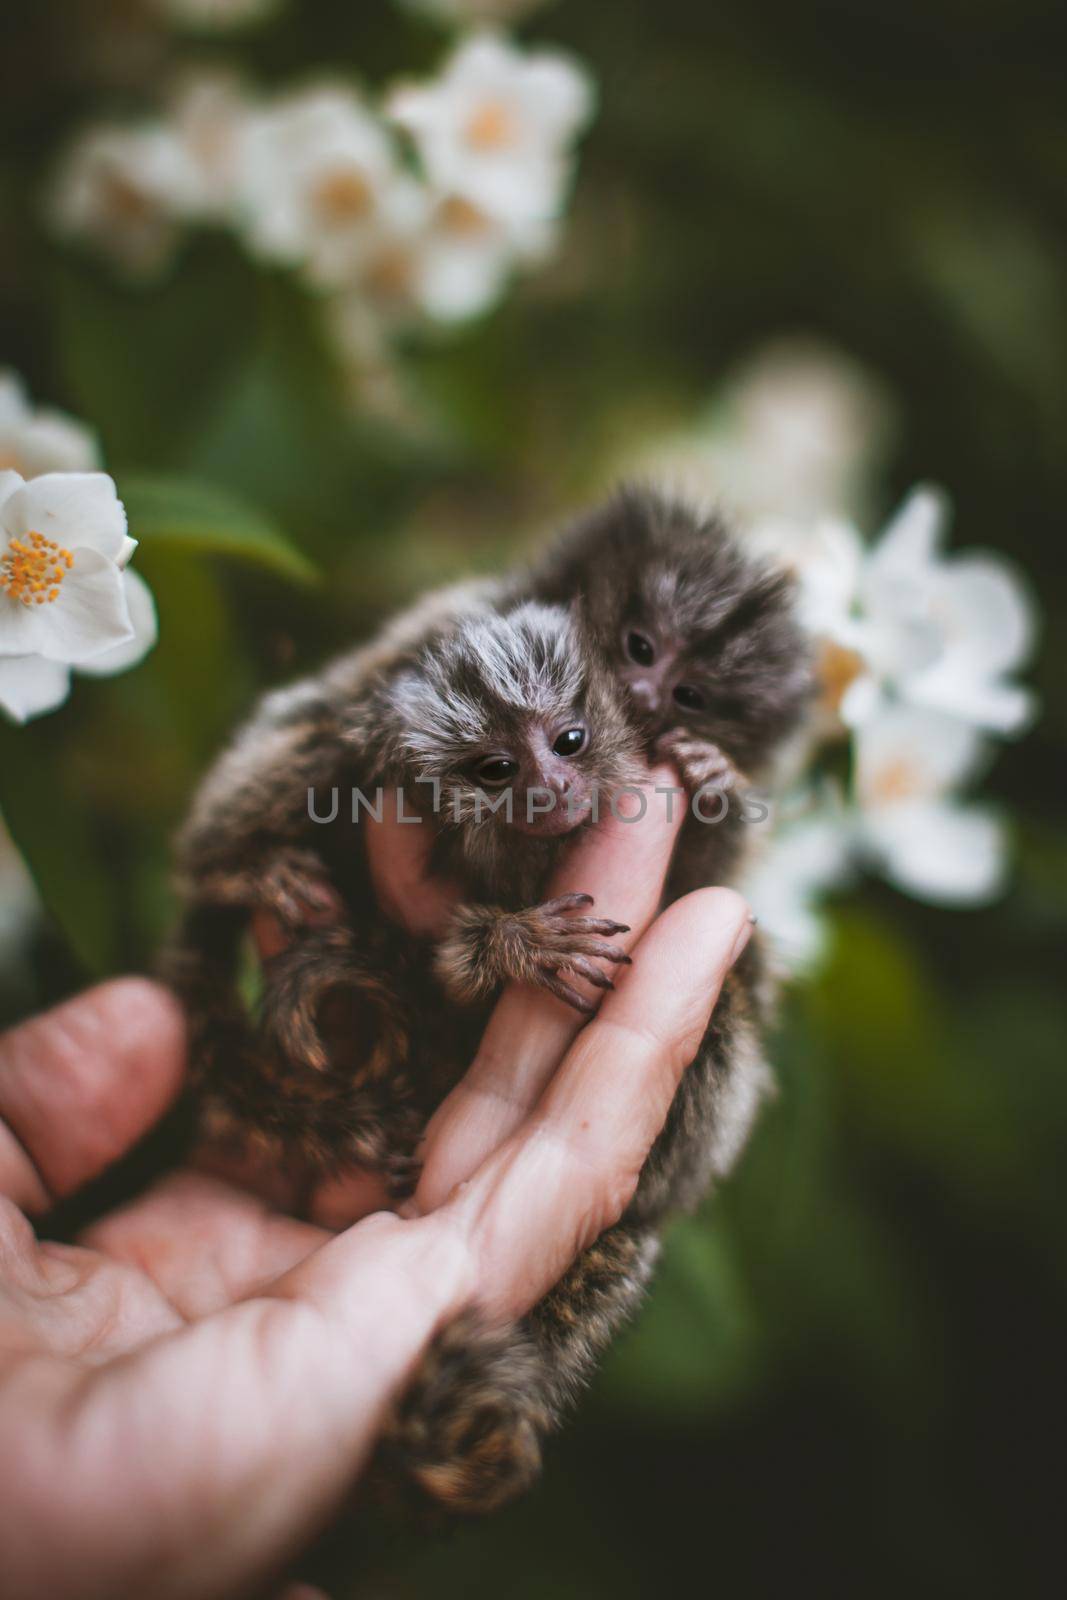 The common marmoset babies in summer garden on human hand by RosaJay